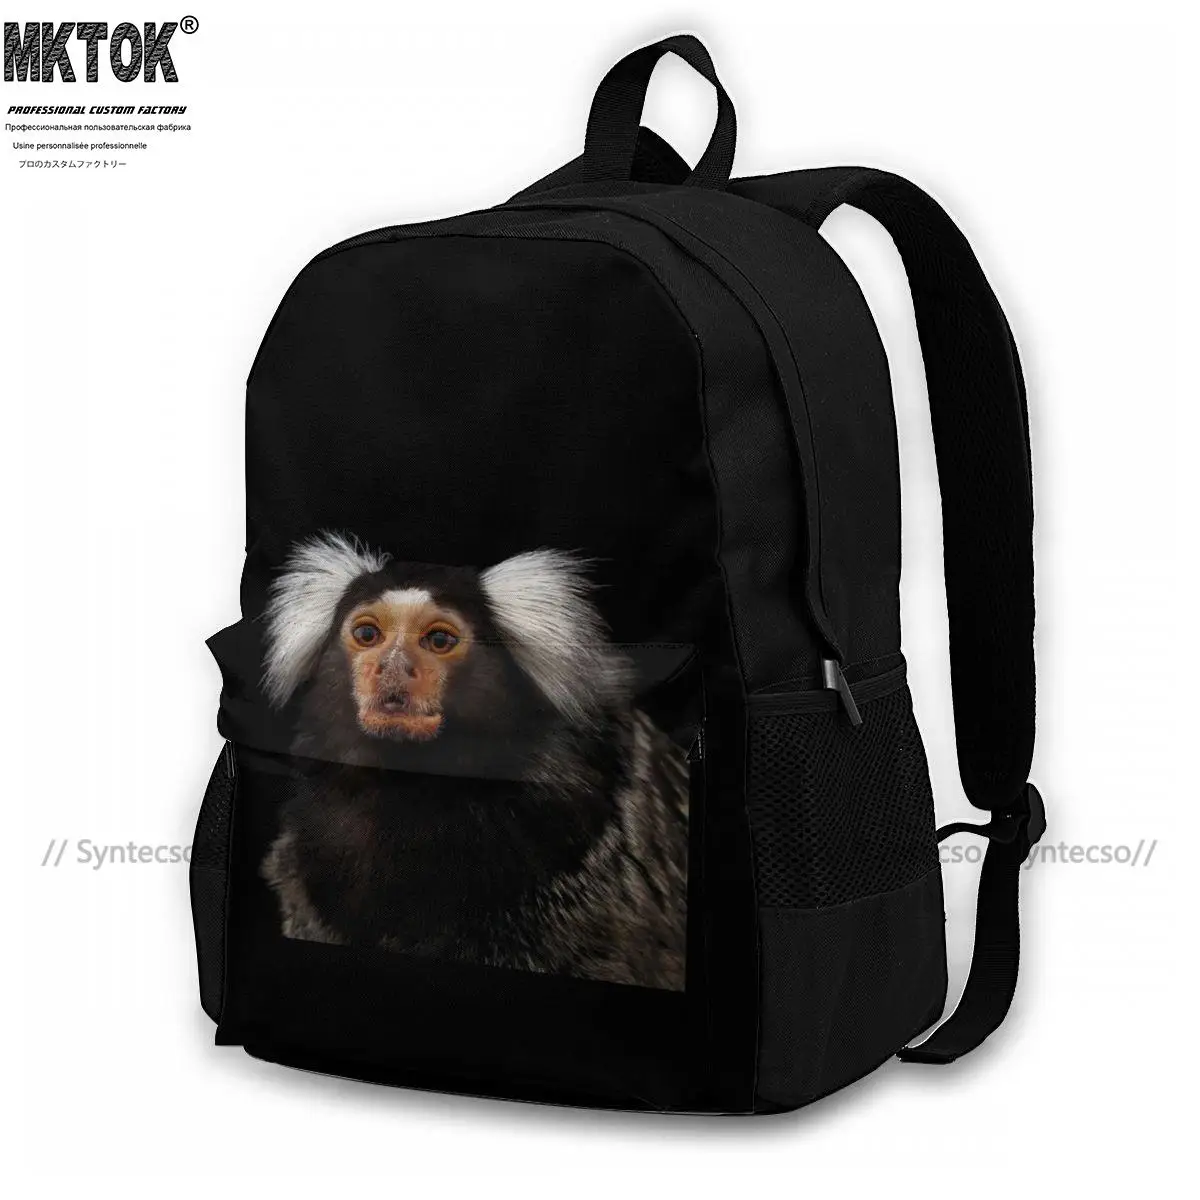 

Monkey Backpacks Polyester Commuter Youth Backpack Large Nice Bags